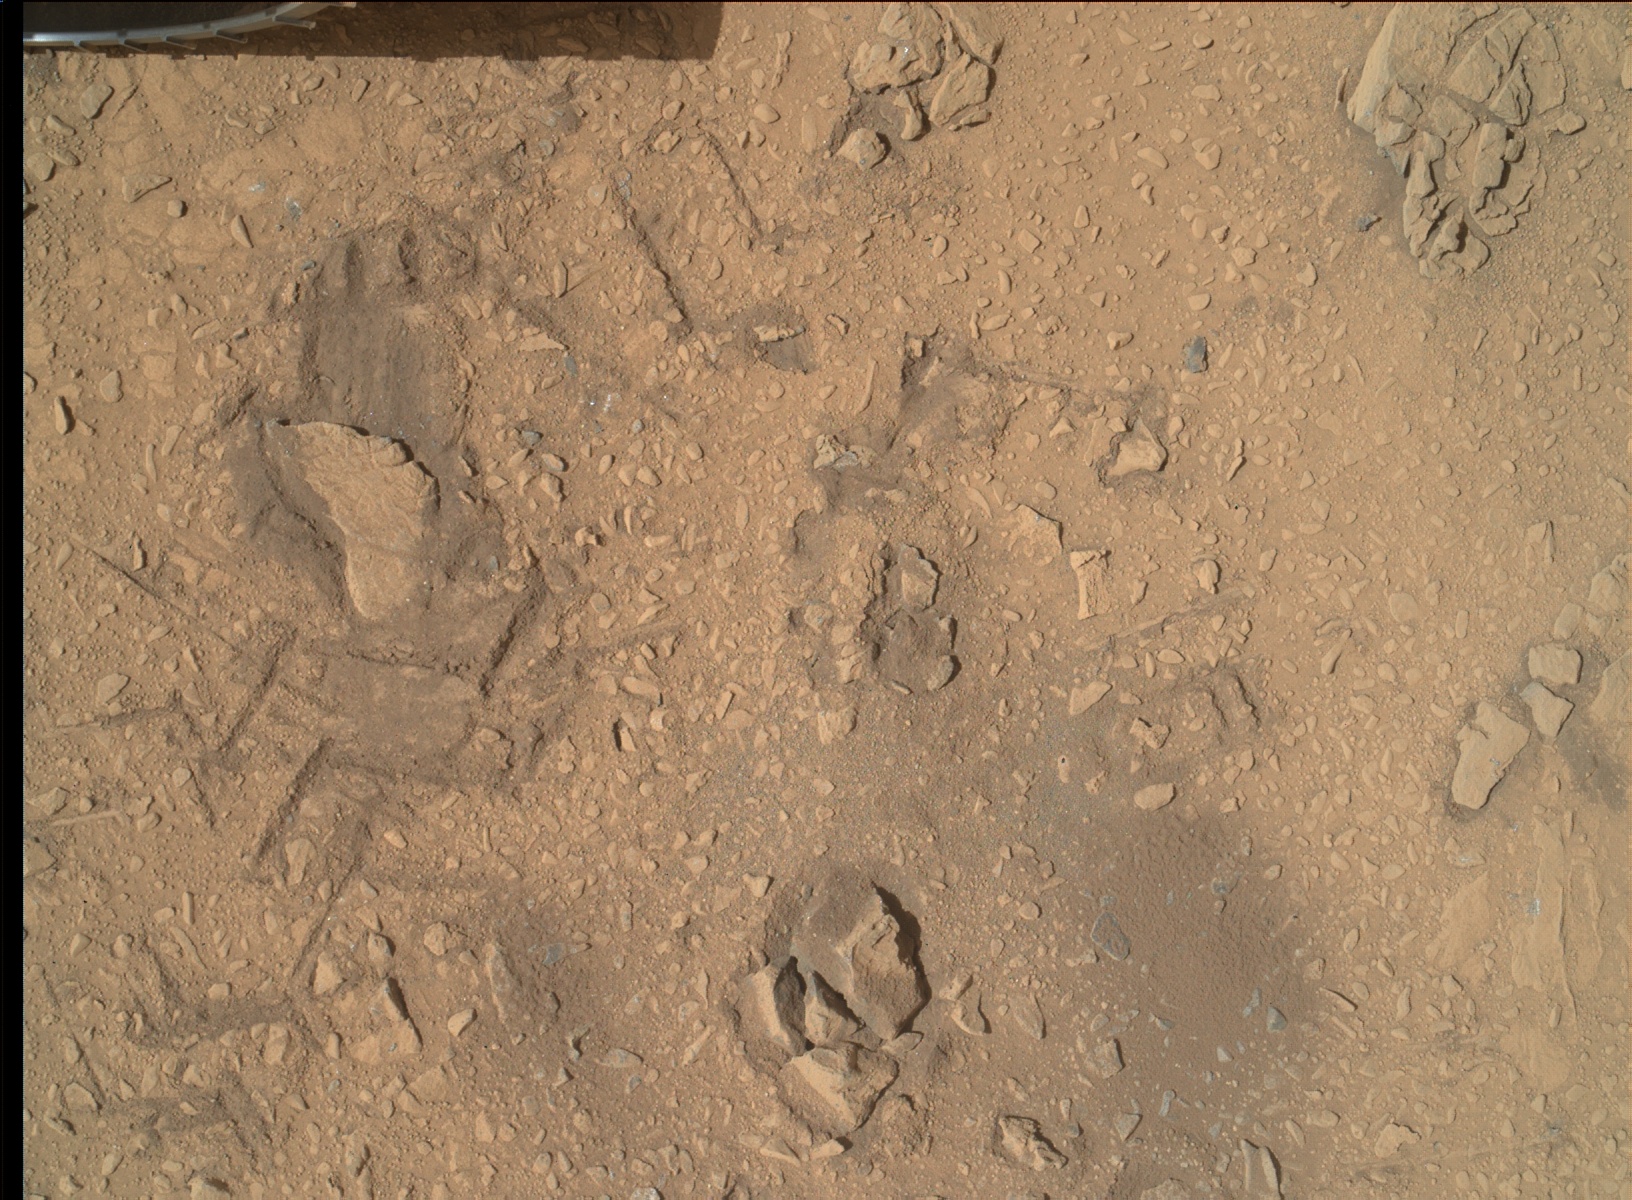 Nasa's Mars rover Curiosity acquired this image using its Mars Hand Lens Imager (MAHLI) on Sol 73